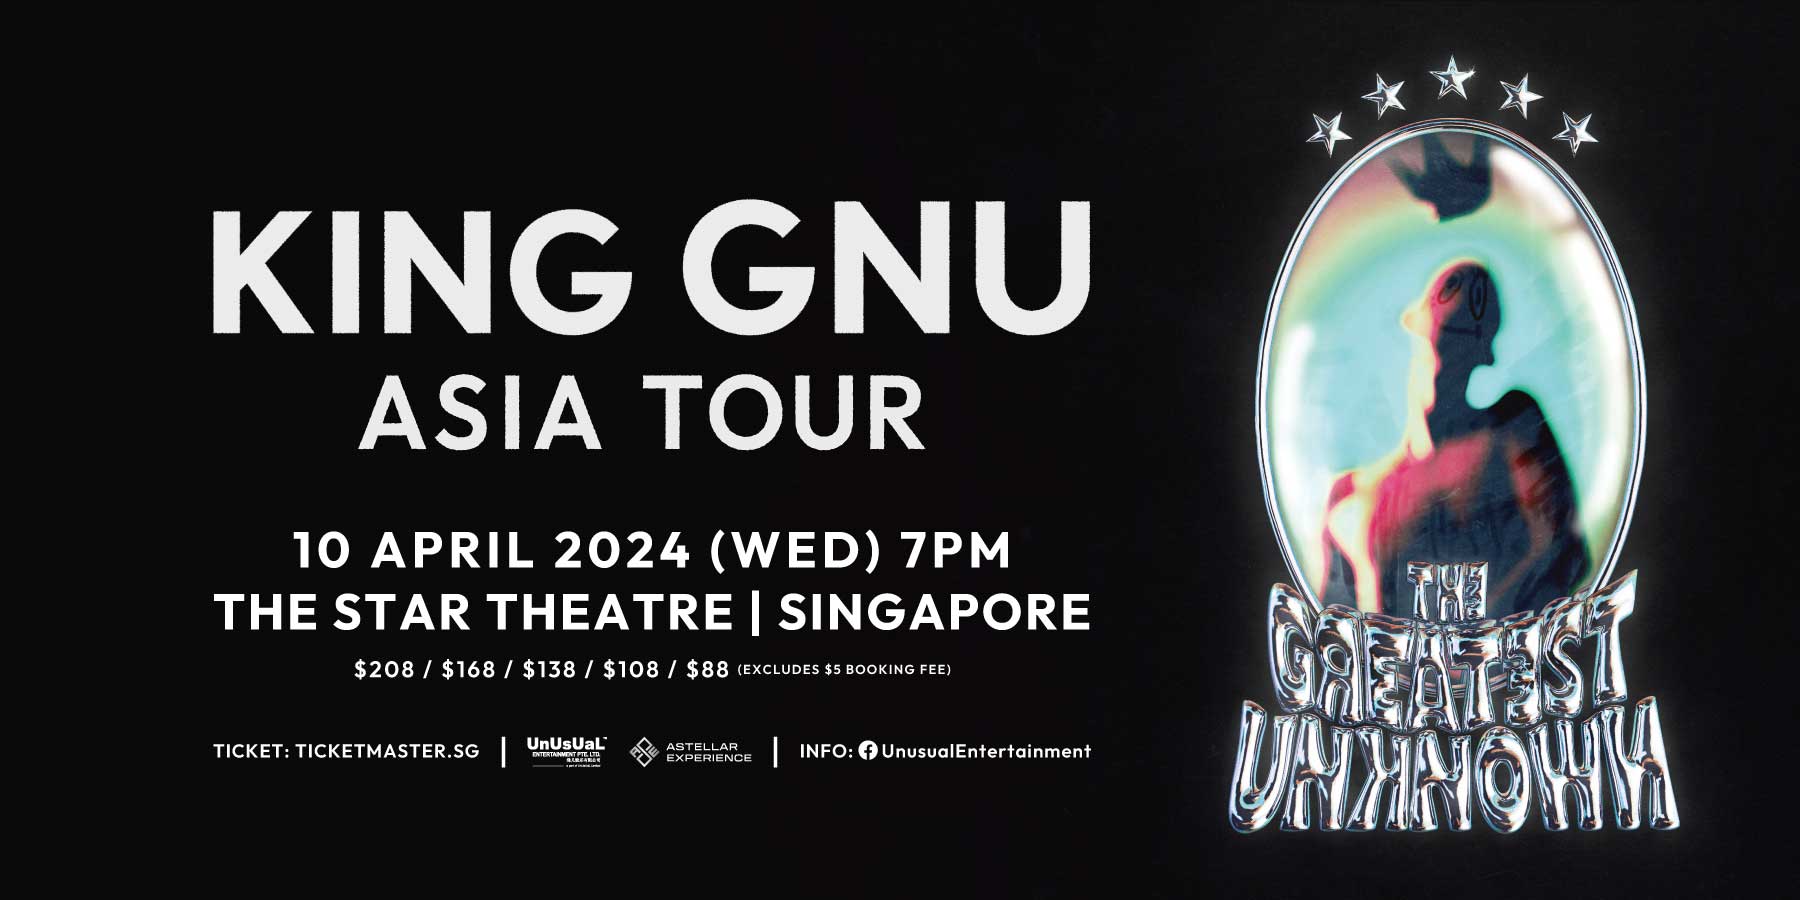 King Gnu Asia Tour『THE GREATEST UNKNOWN』in Singapore